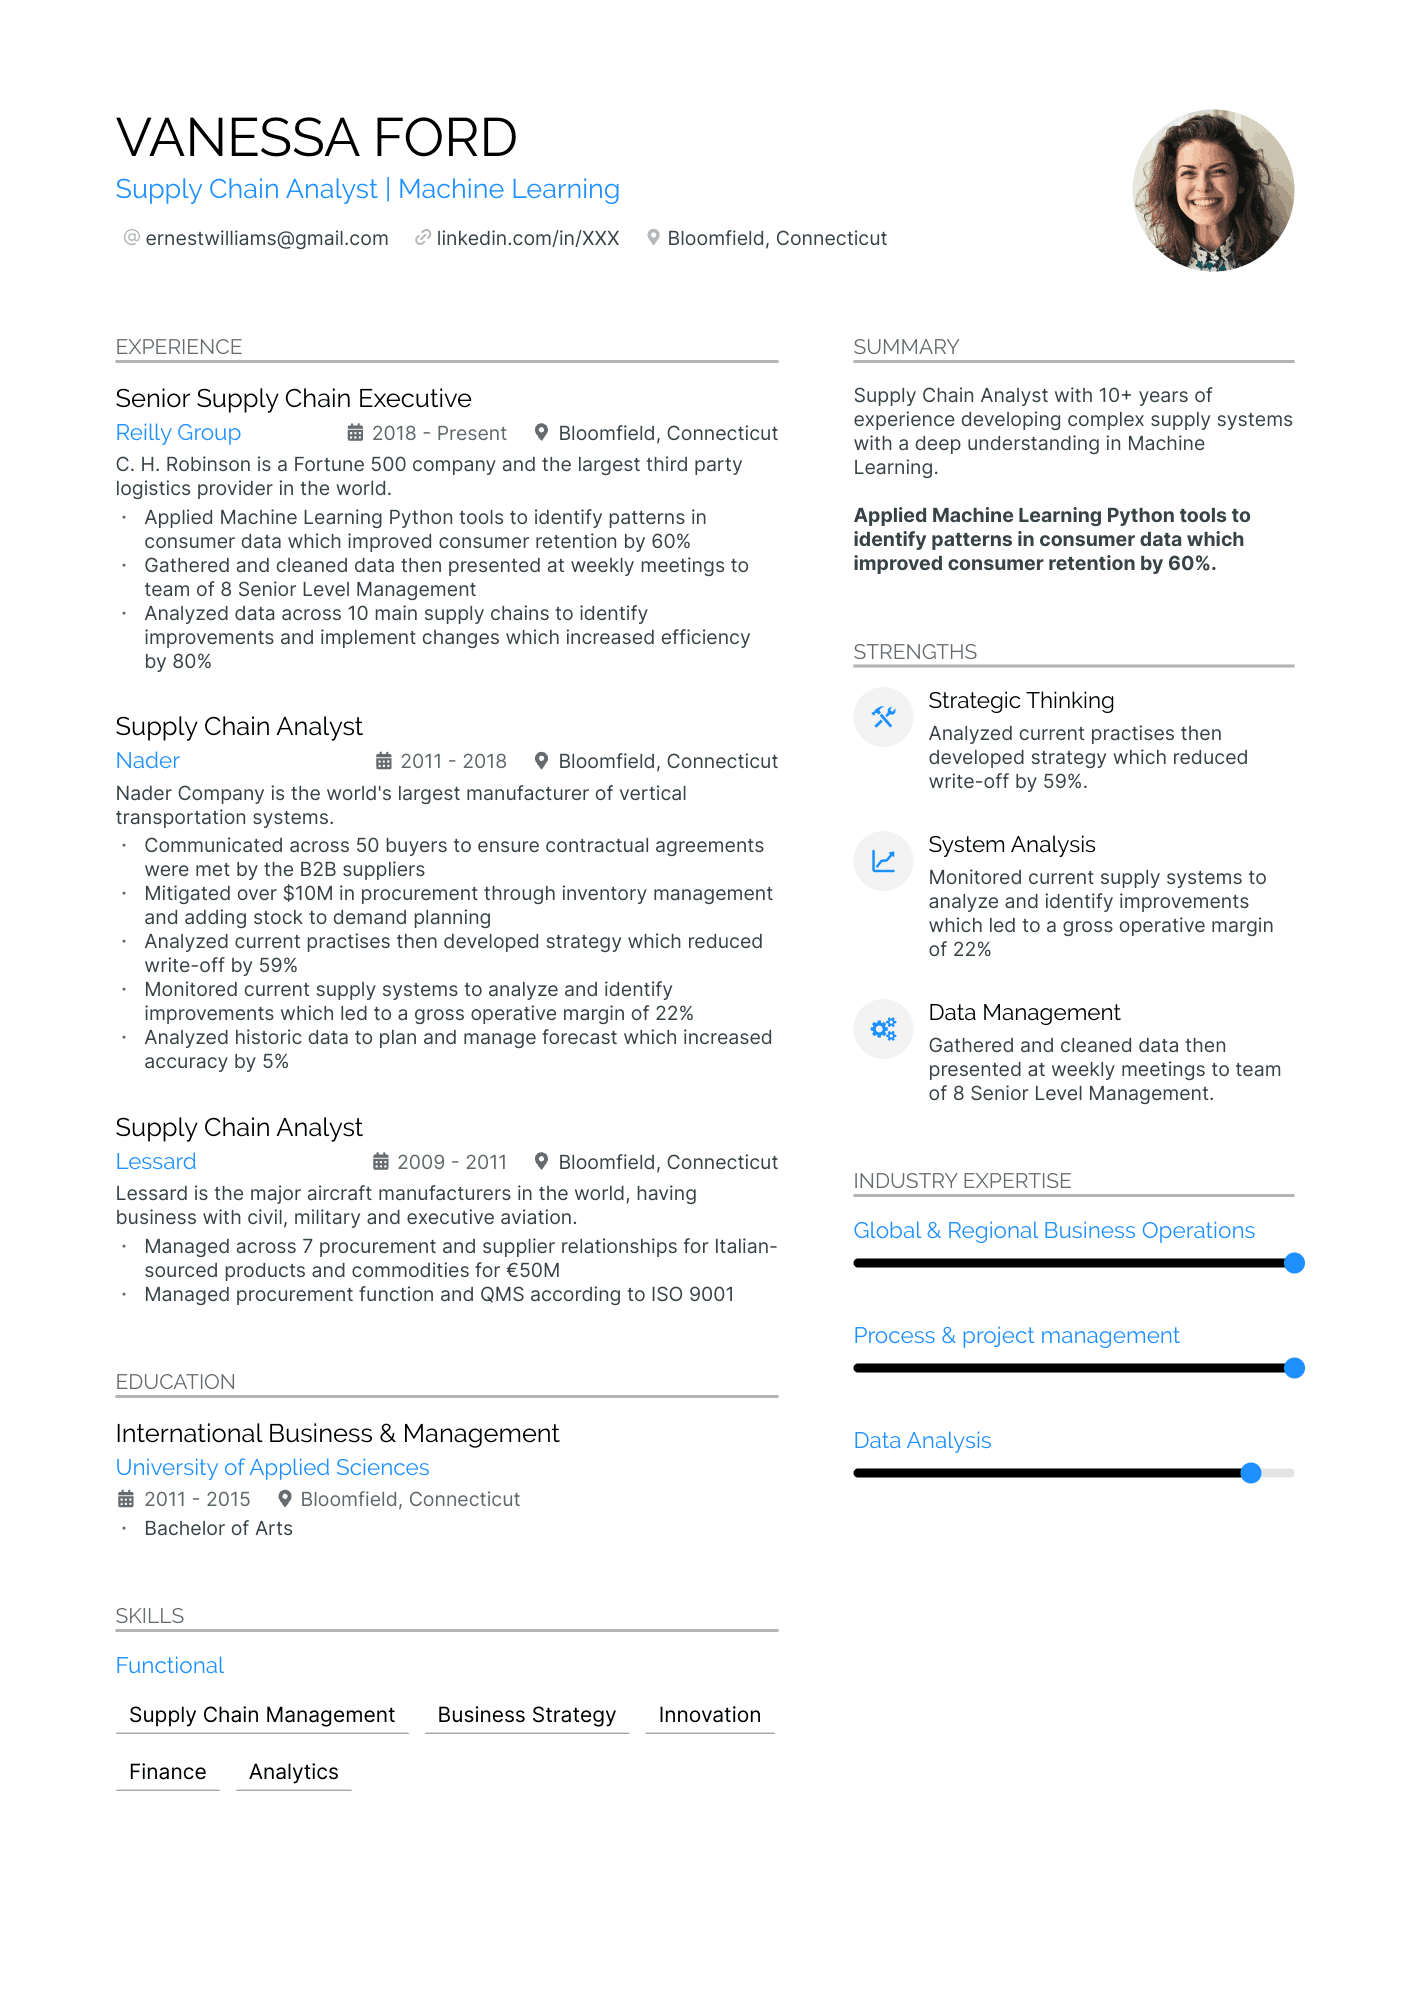 Supply Chain Analyst resume example